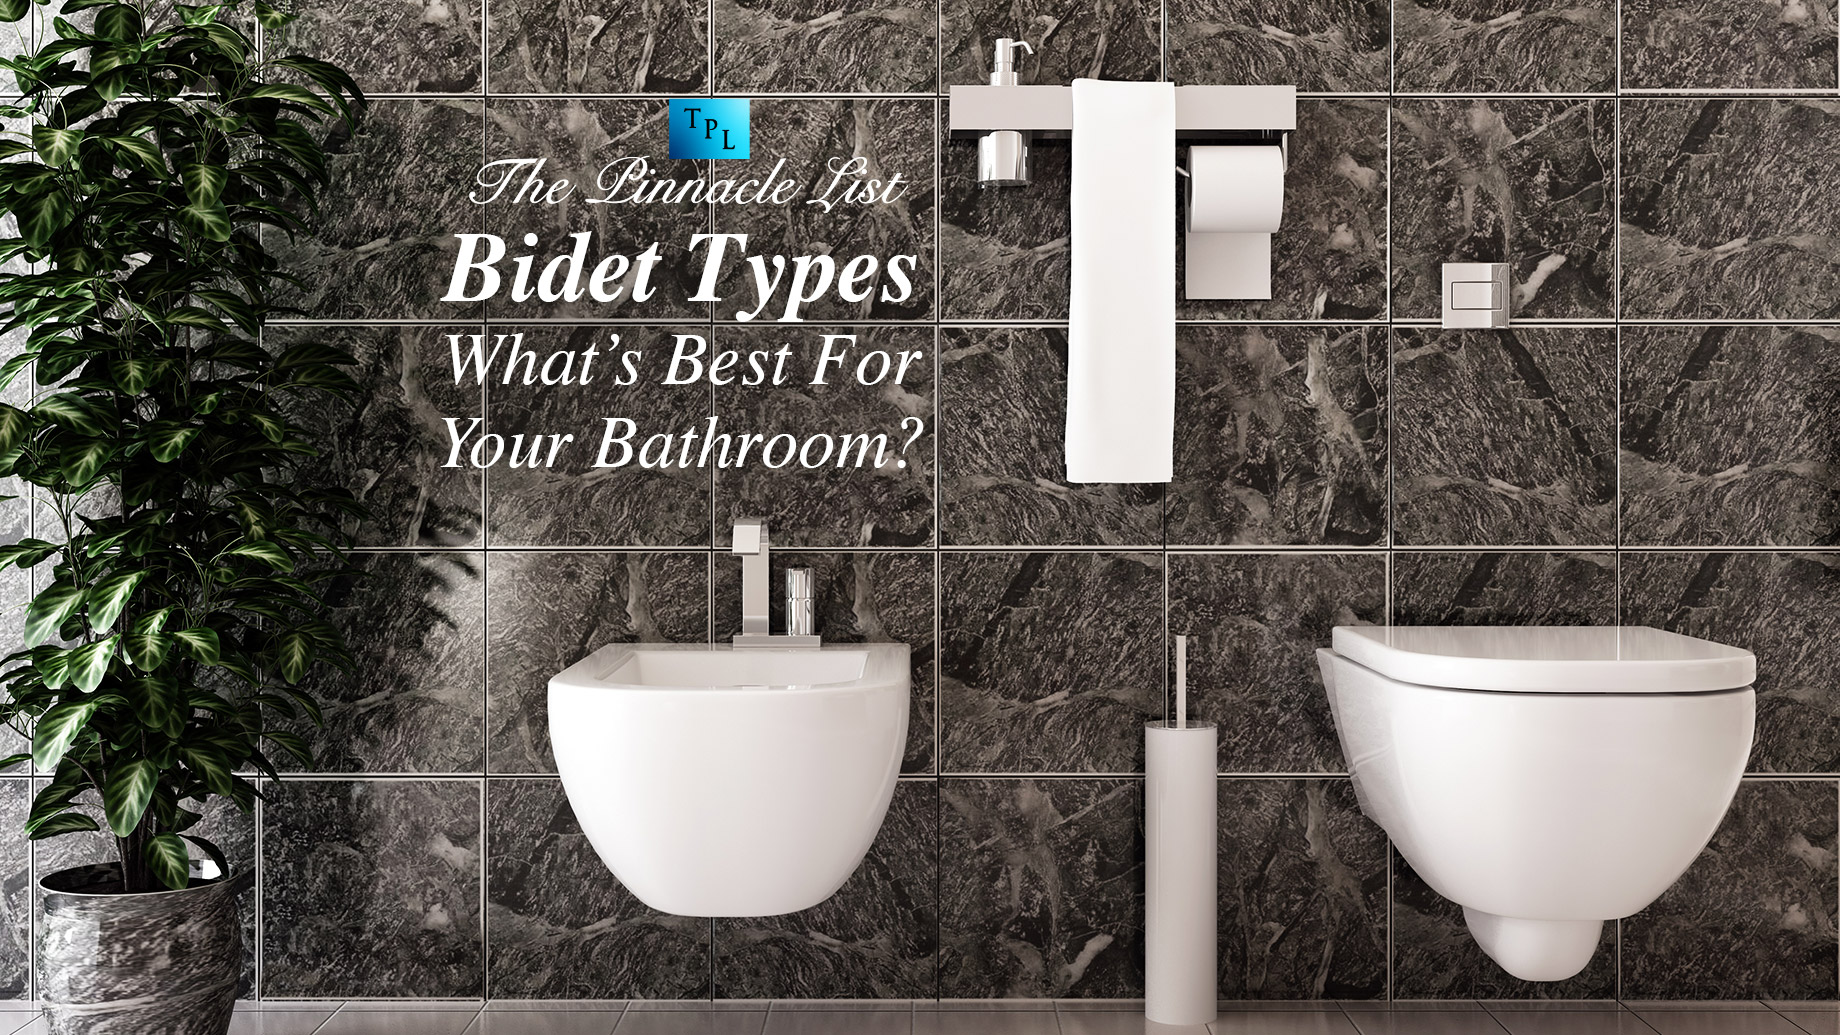 Bidet Types - What’s Best For Your Bathroom?